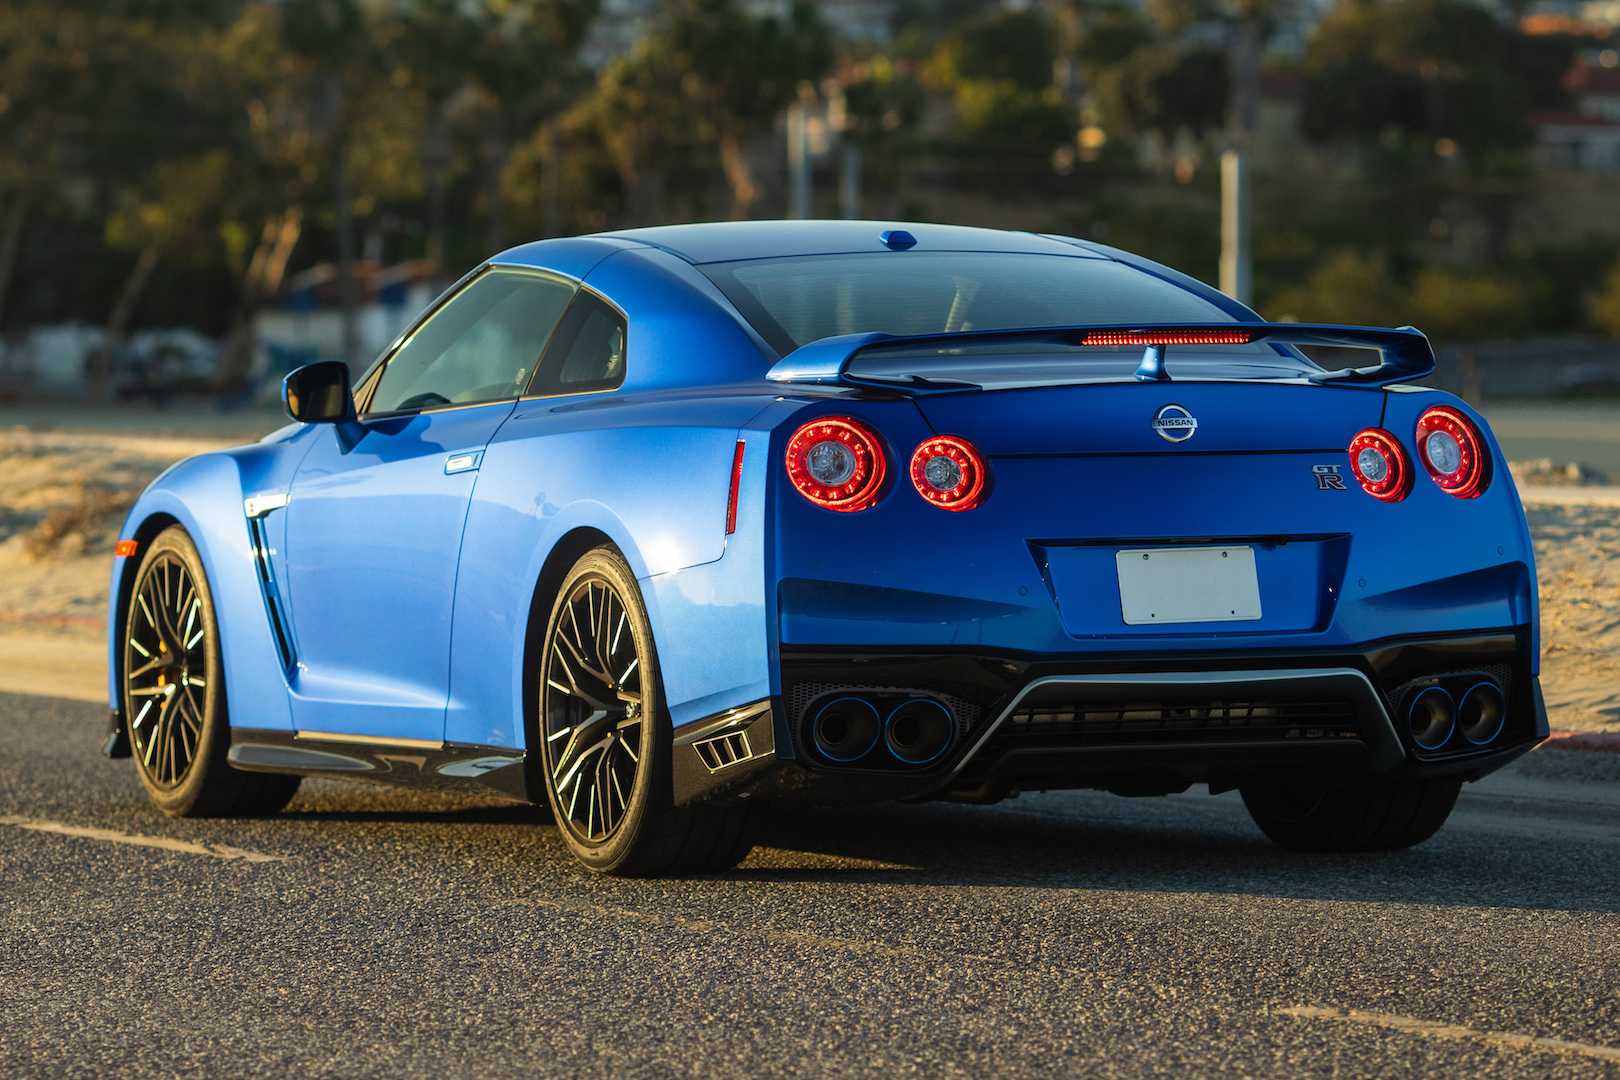 2023 Nissan GTR: Will This Generation Be Hybrid?